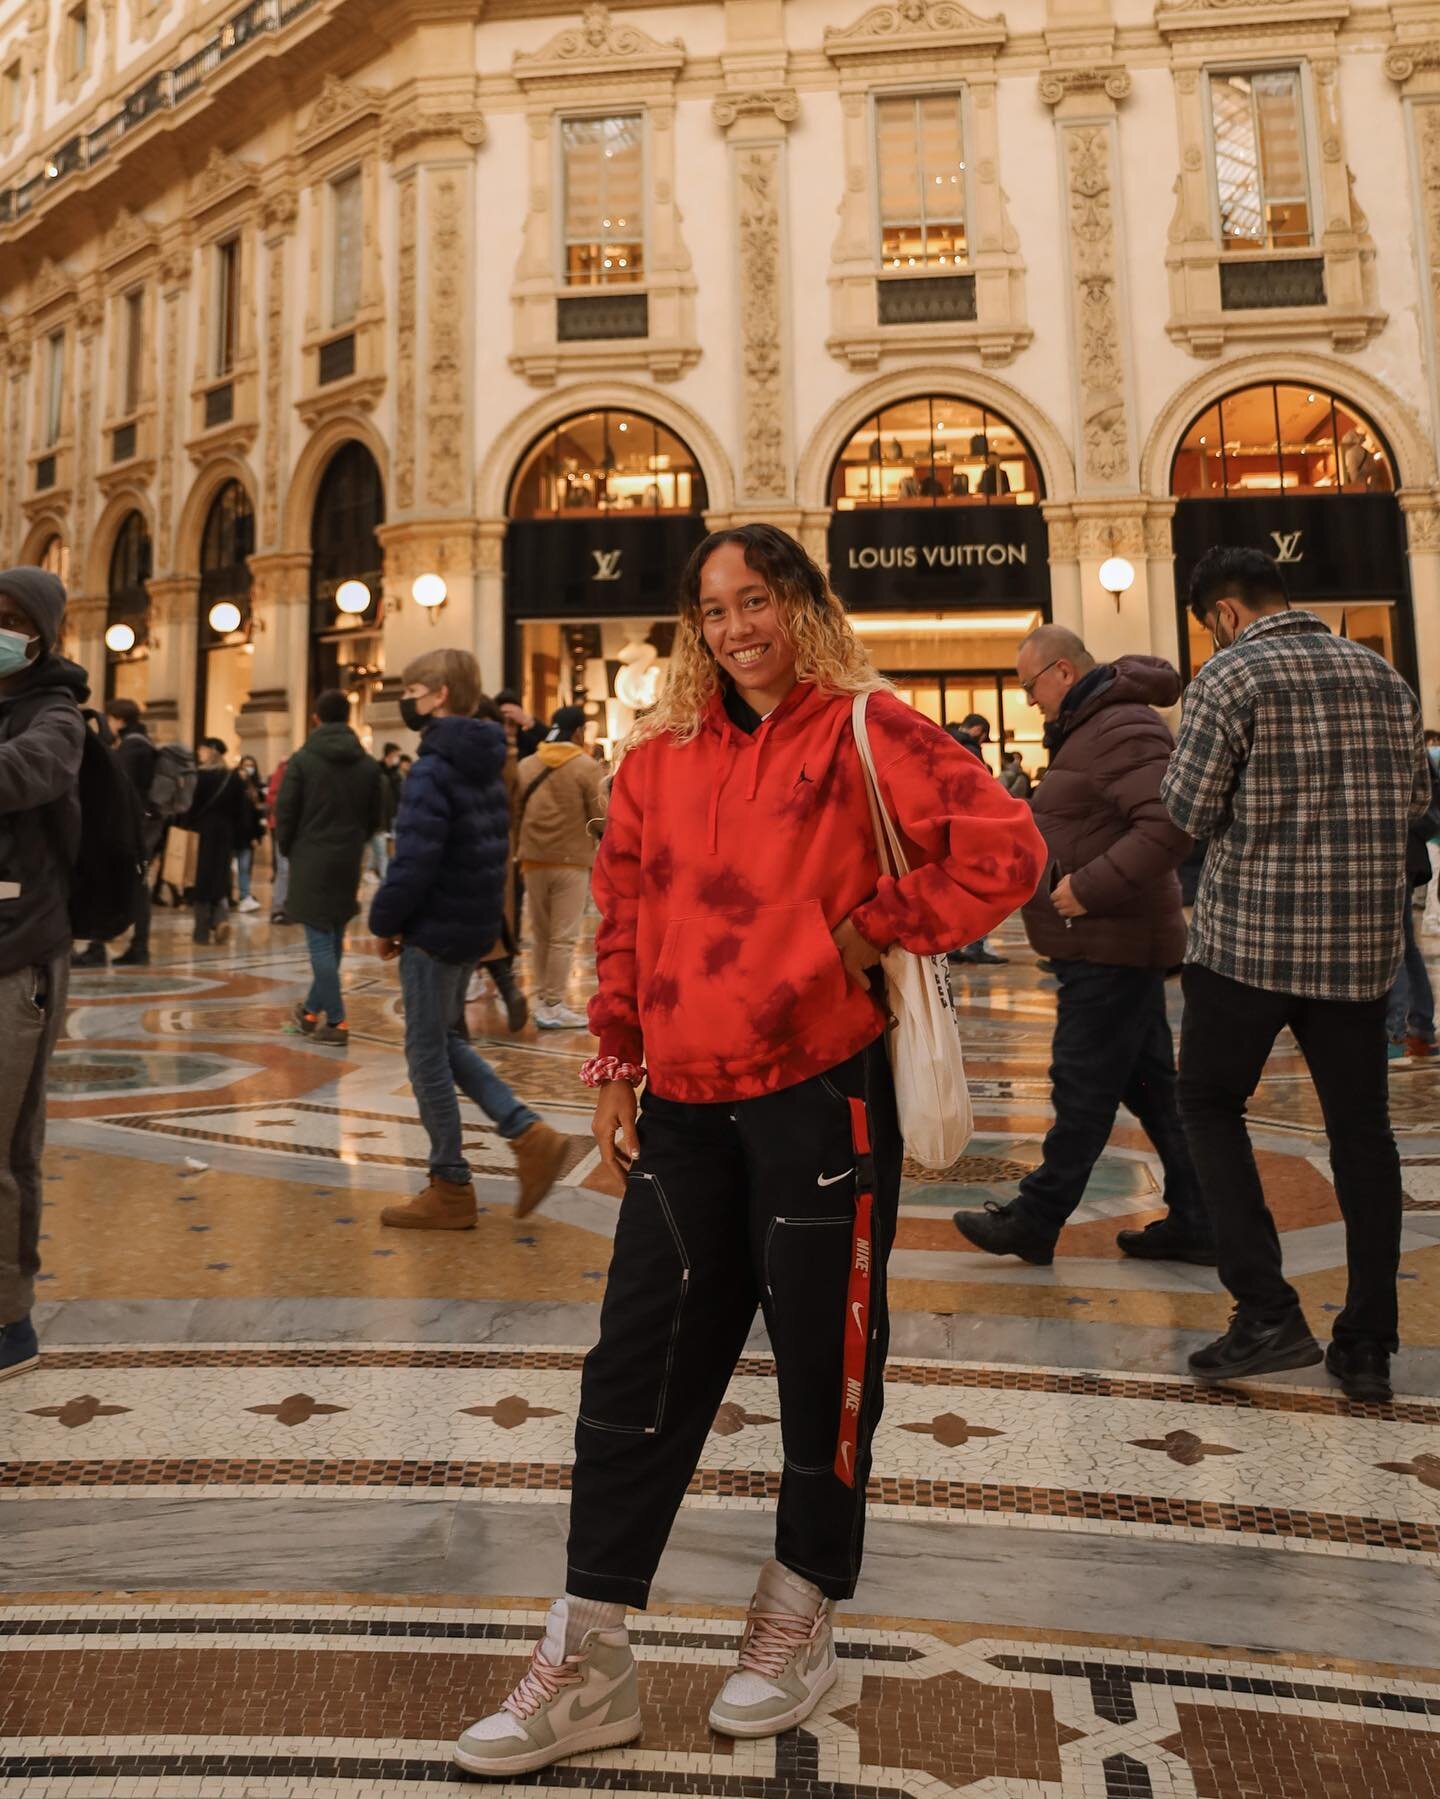 Price went up🤌🏽

Swipe for pics of this beautiful building!

One of my favorite spots I visited in Milan was this Galleria Vittorio Emanuele II. The architecture of this place is so amazing and the details😱
I literally fell in love!

#igmilano #it